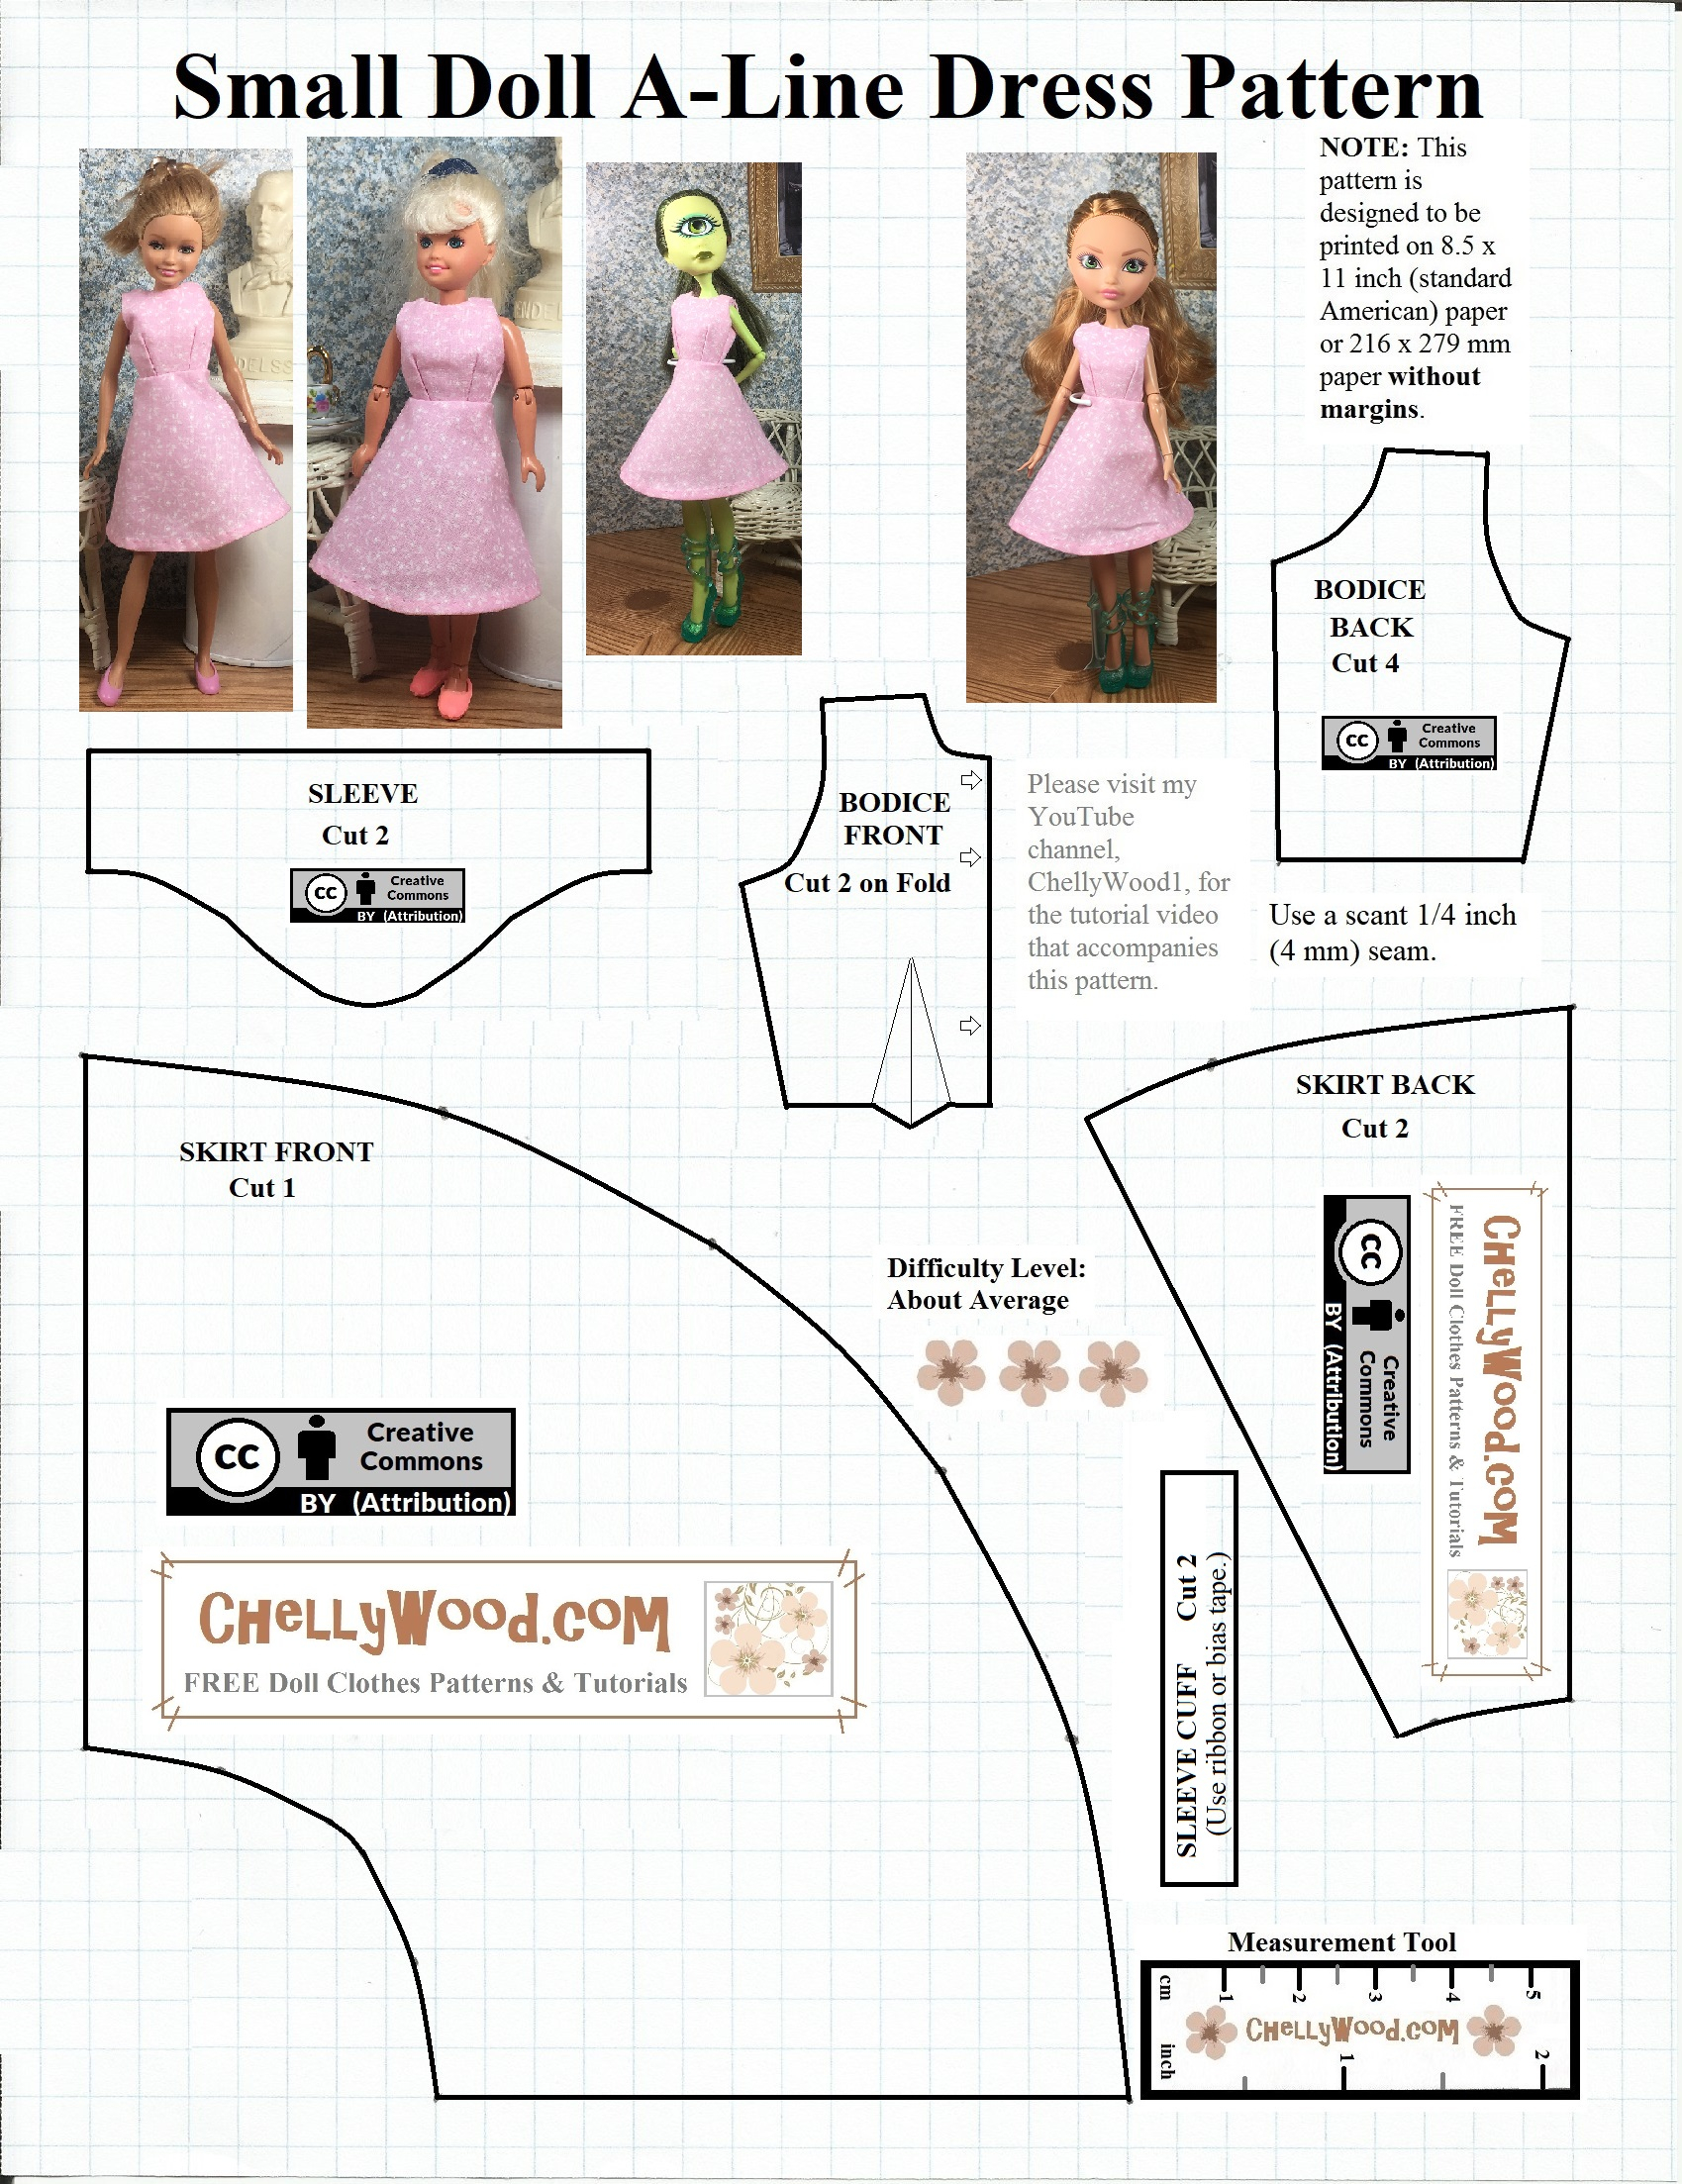 FREE Printable sewing Pattern For Small dolls Free 